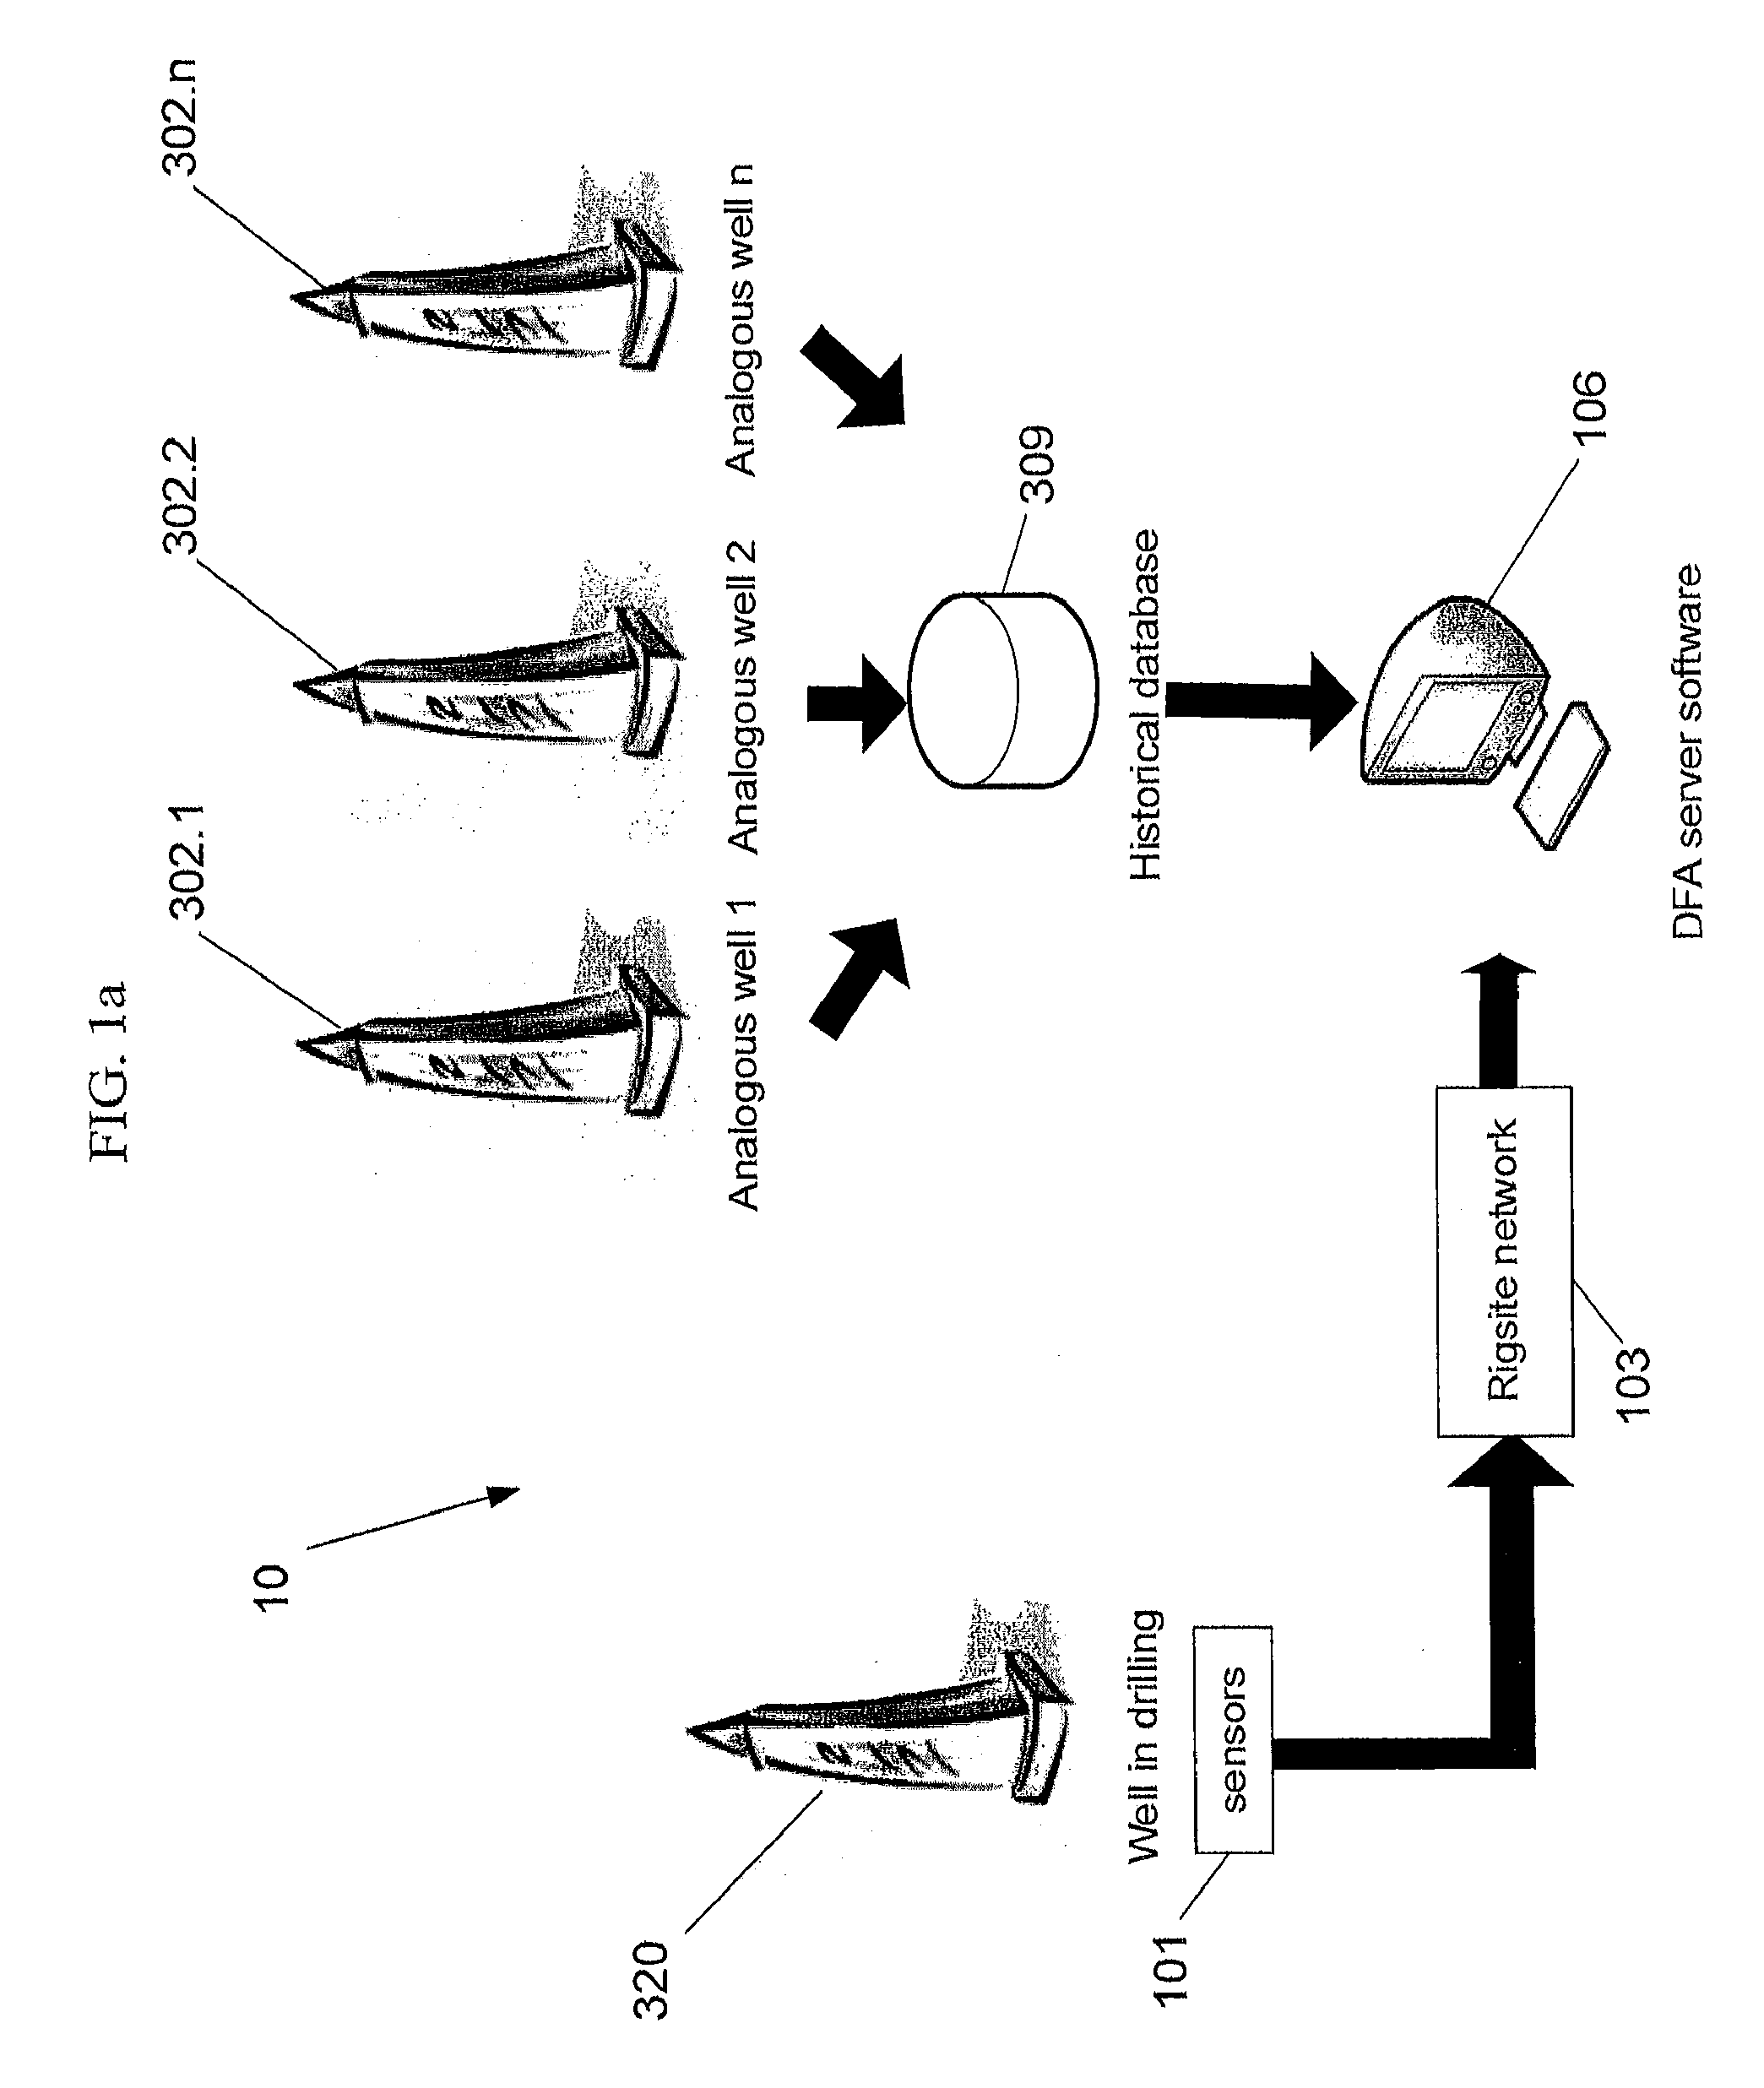 Methods and systems for improved drilling operations using real-time and historical drilling data